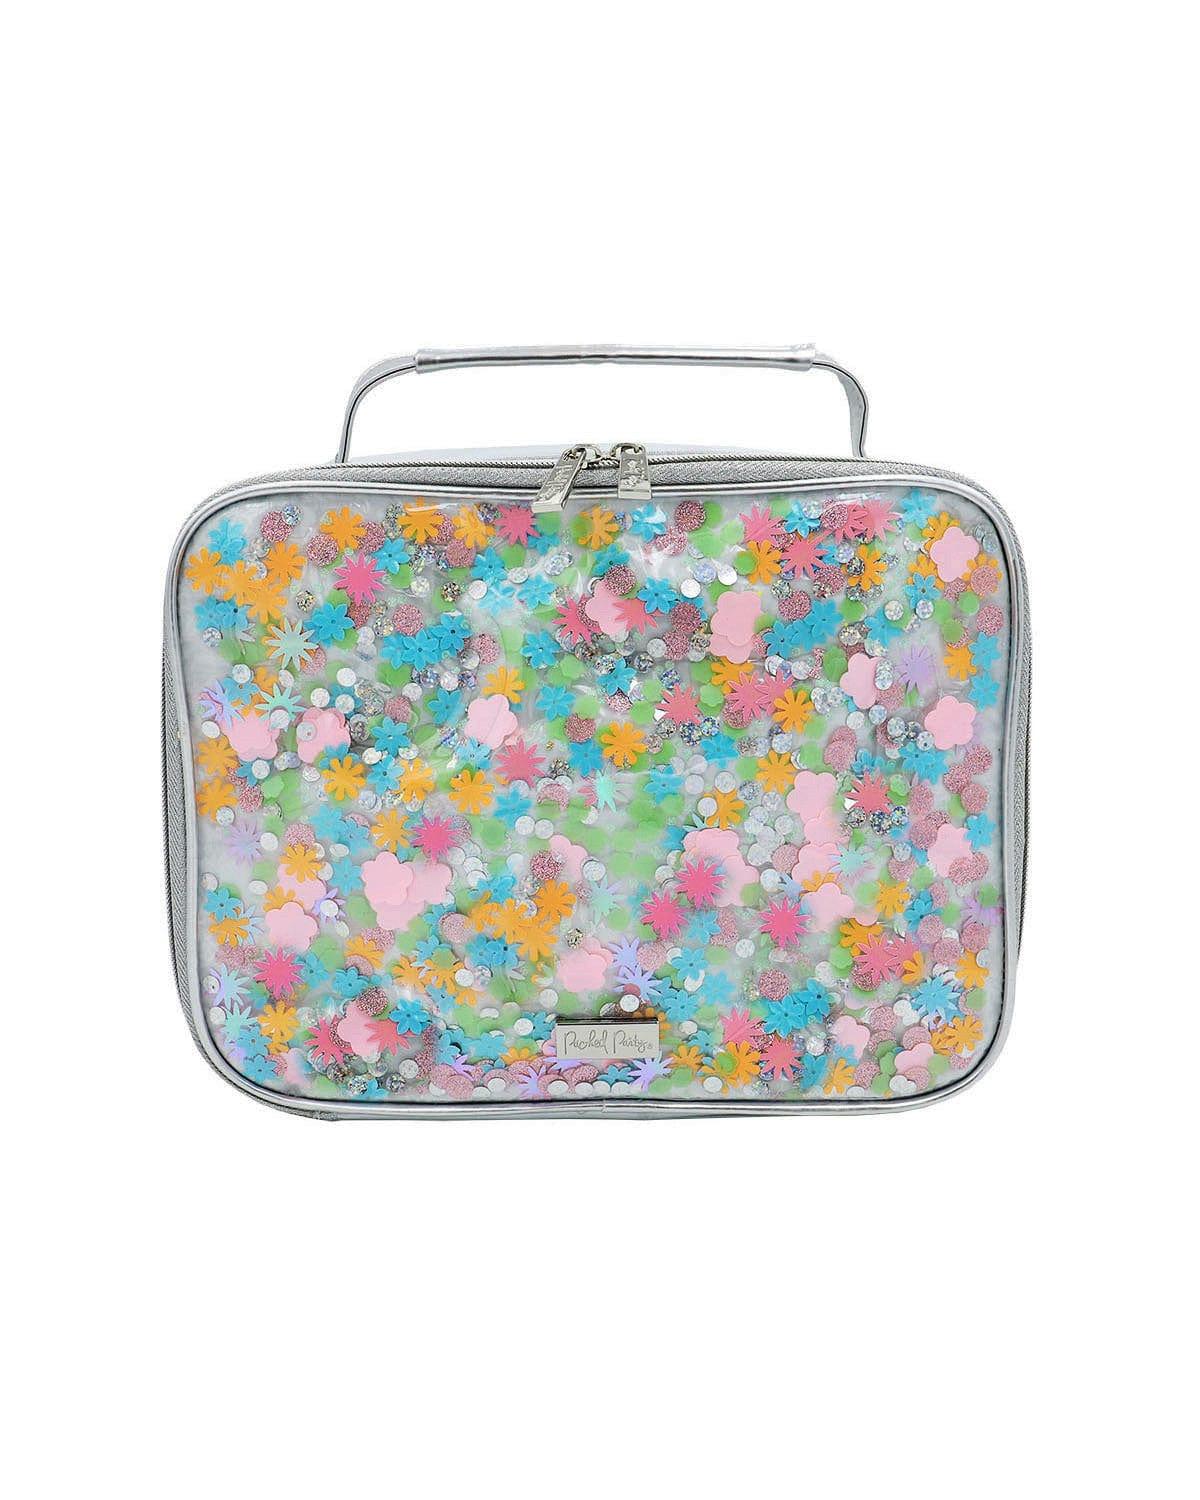 Packed Party: Flower Shop Confetti Insulated Lunchbox